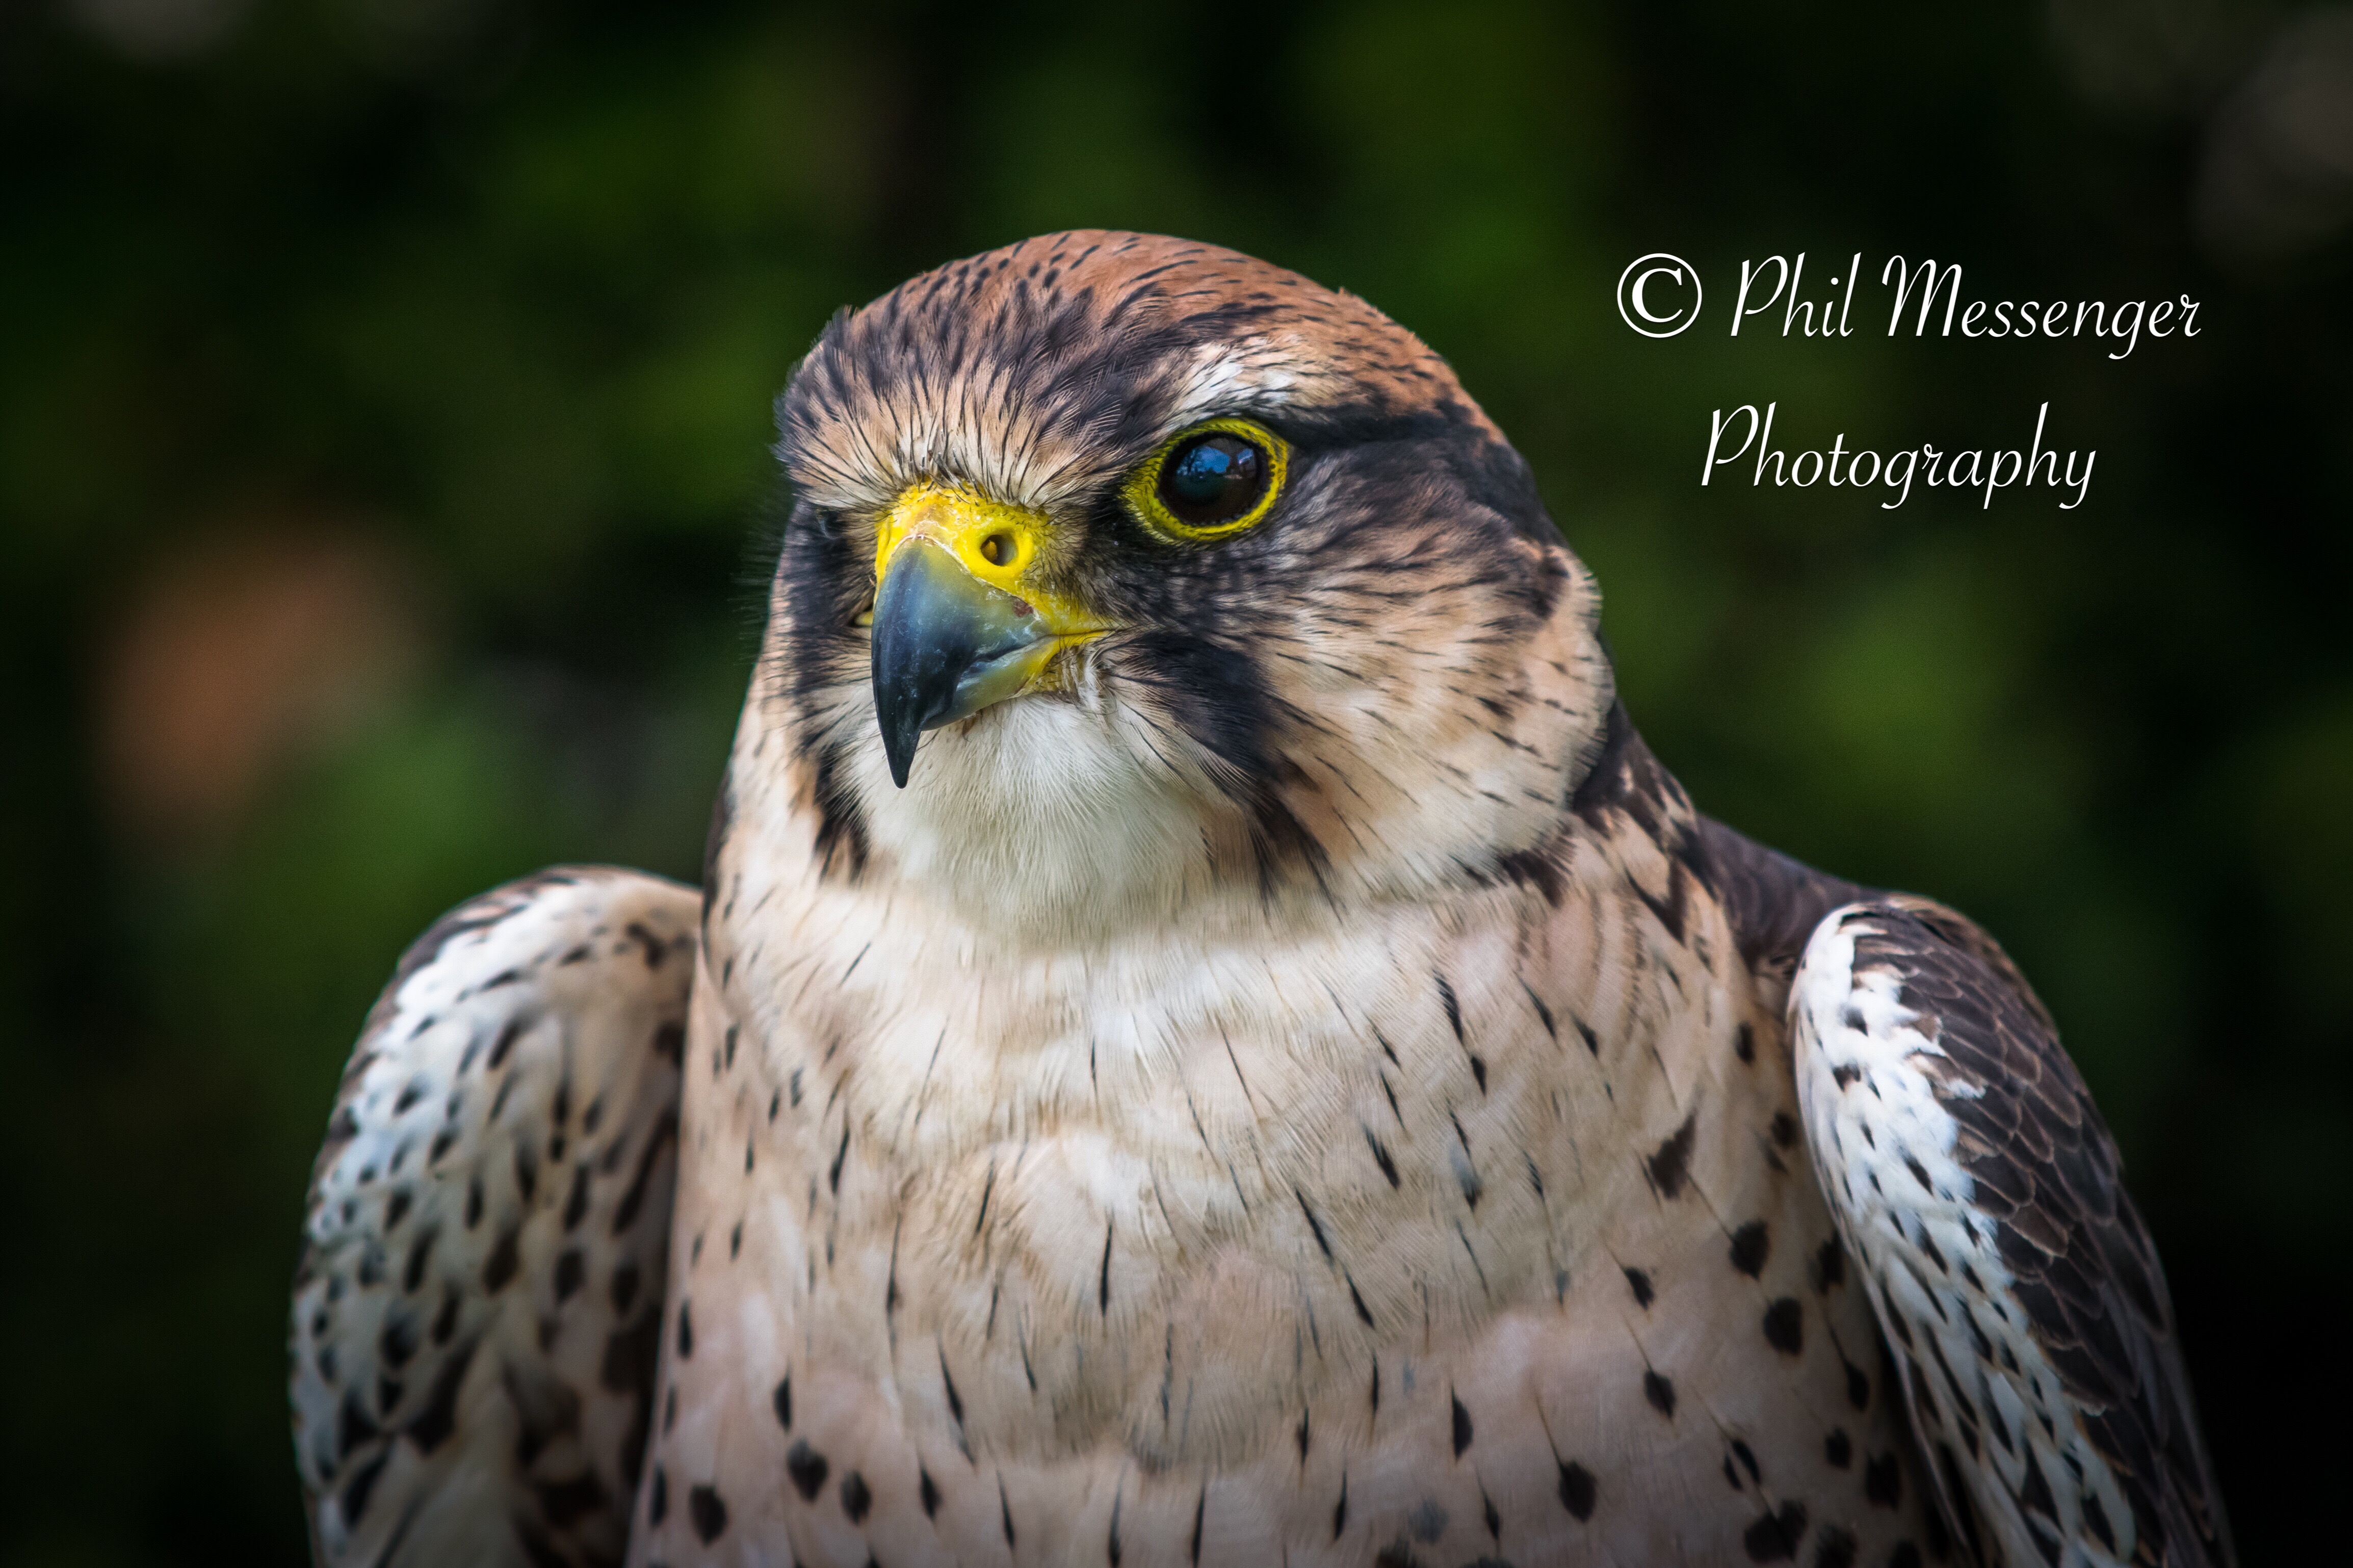 A Lanner falcon taken at Cotswold wildlife park, Burford. Displayed by Cotswold falconry.